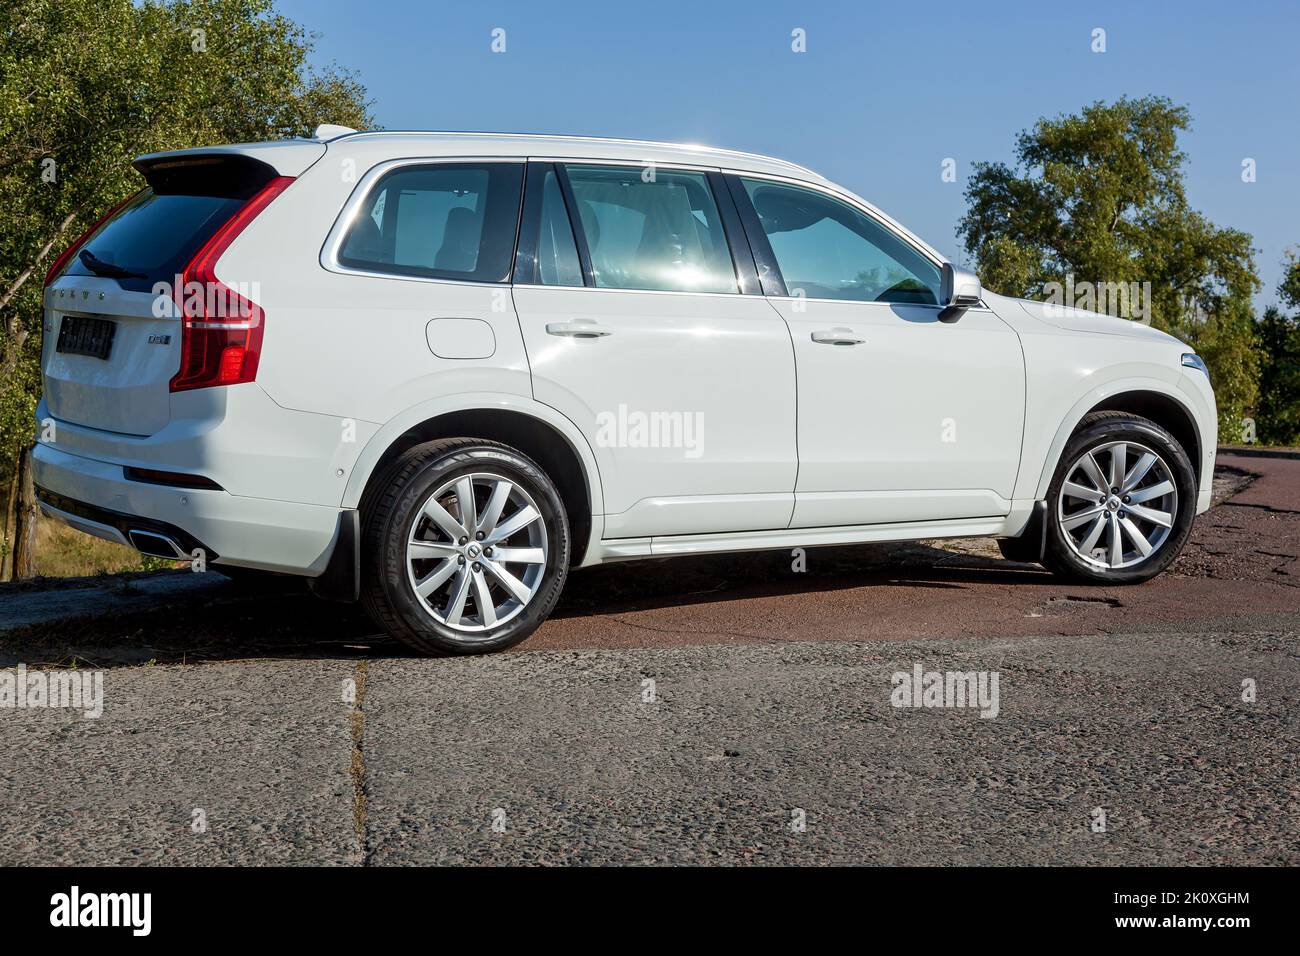 Ukraine Kiev September 26, 2020: Volvo XC90 is the first SUV by Volvo Cars. Designed with Volvo's core values of safety, environment, reliability and Stock Photo